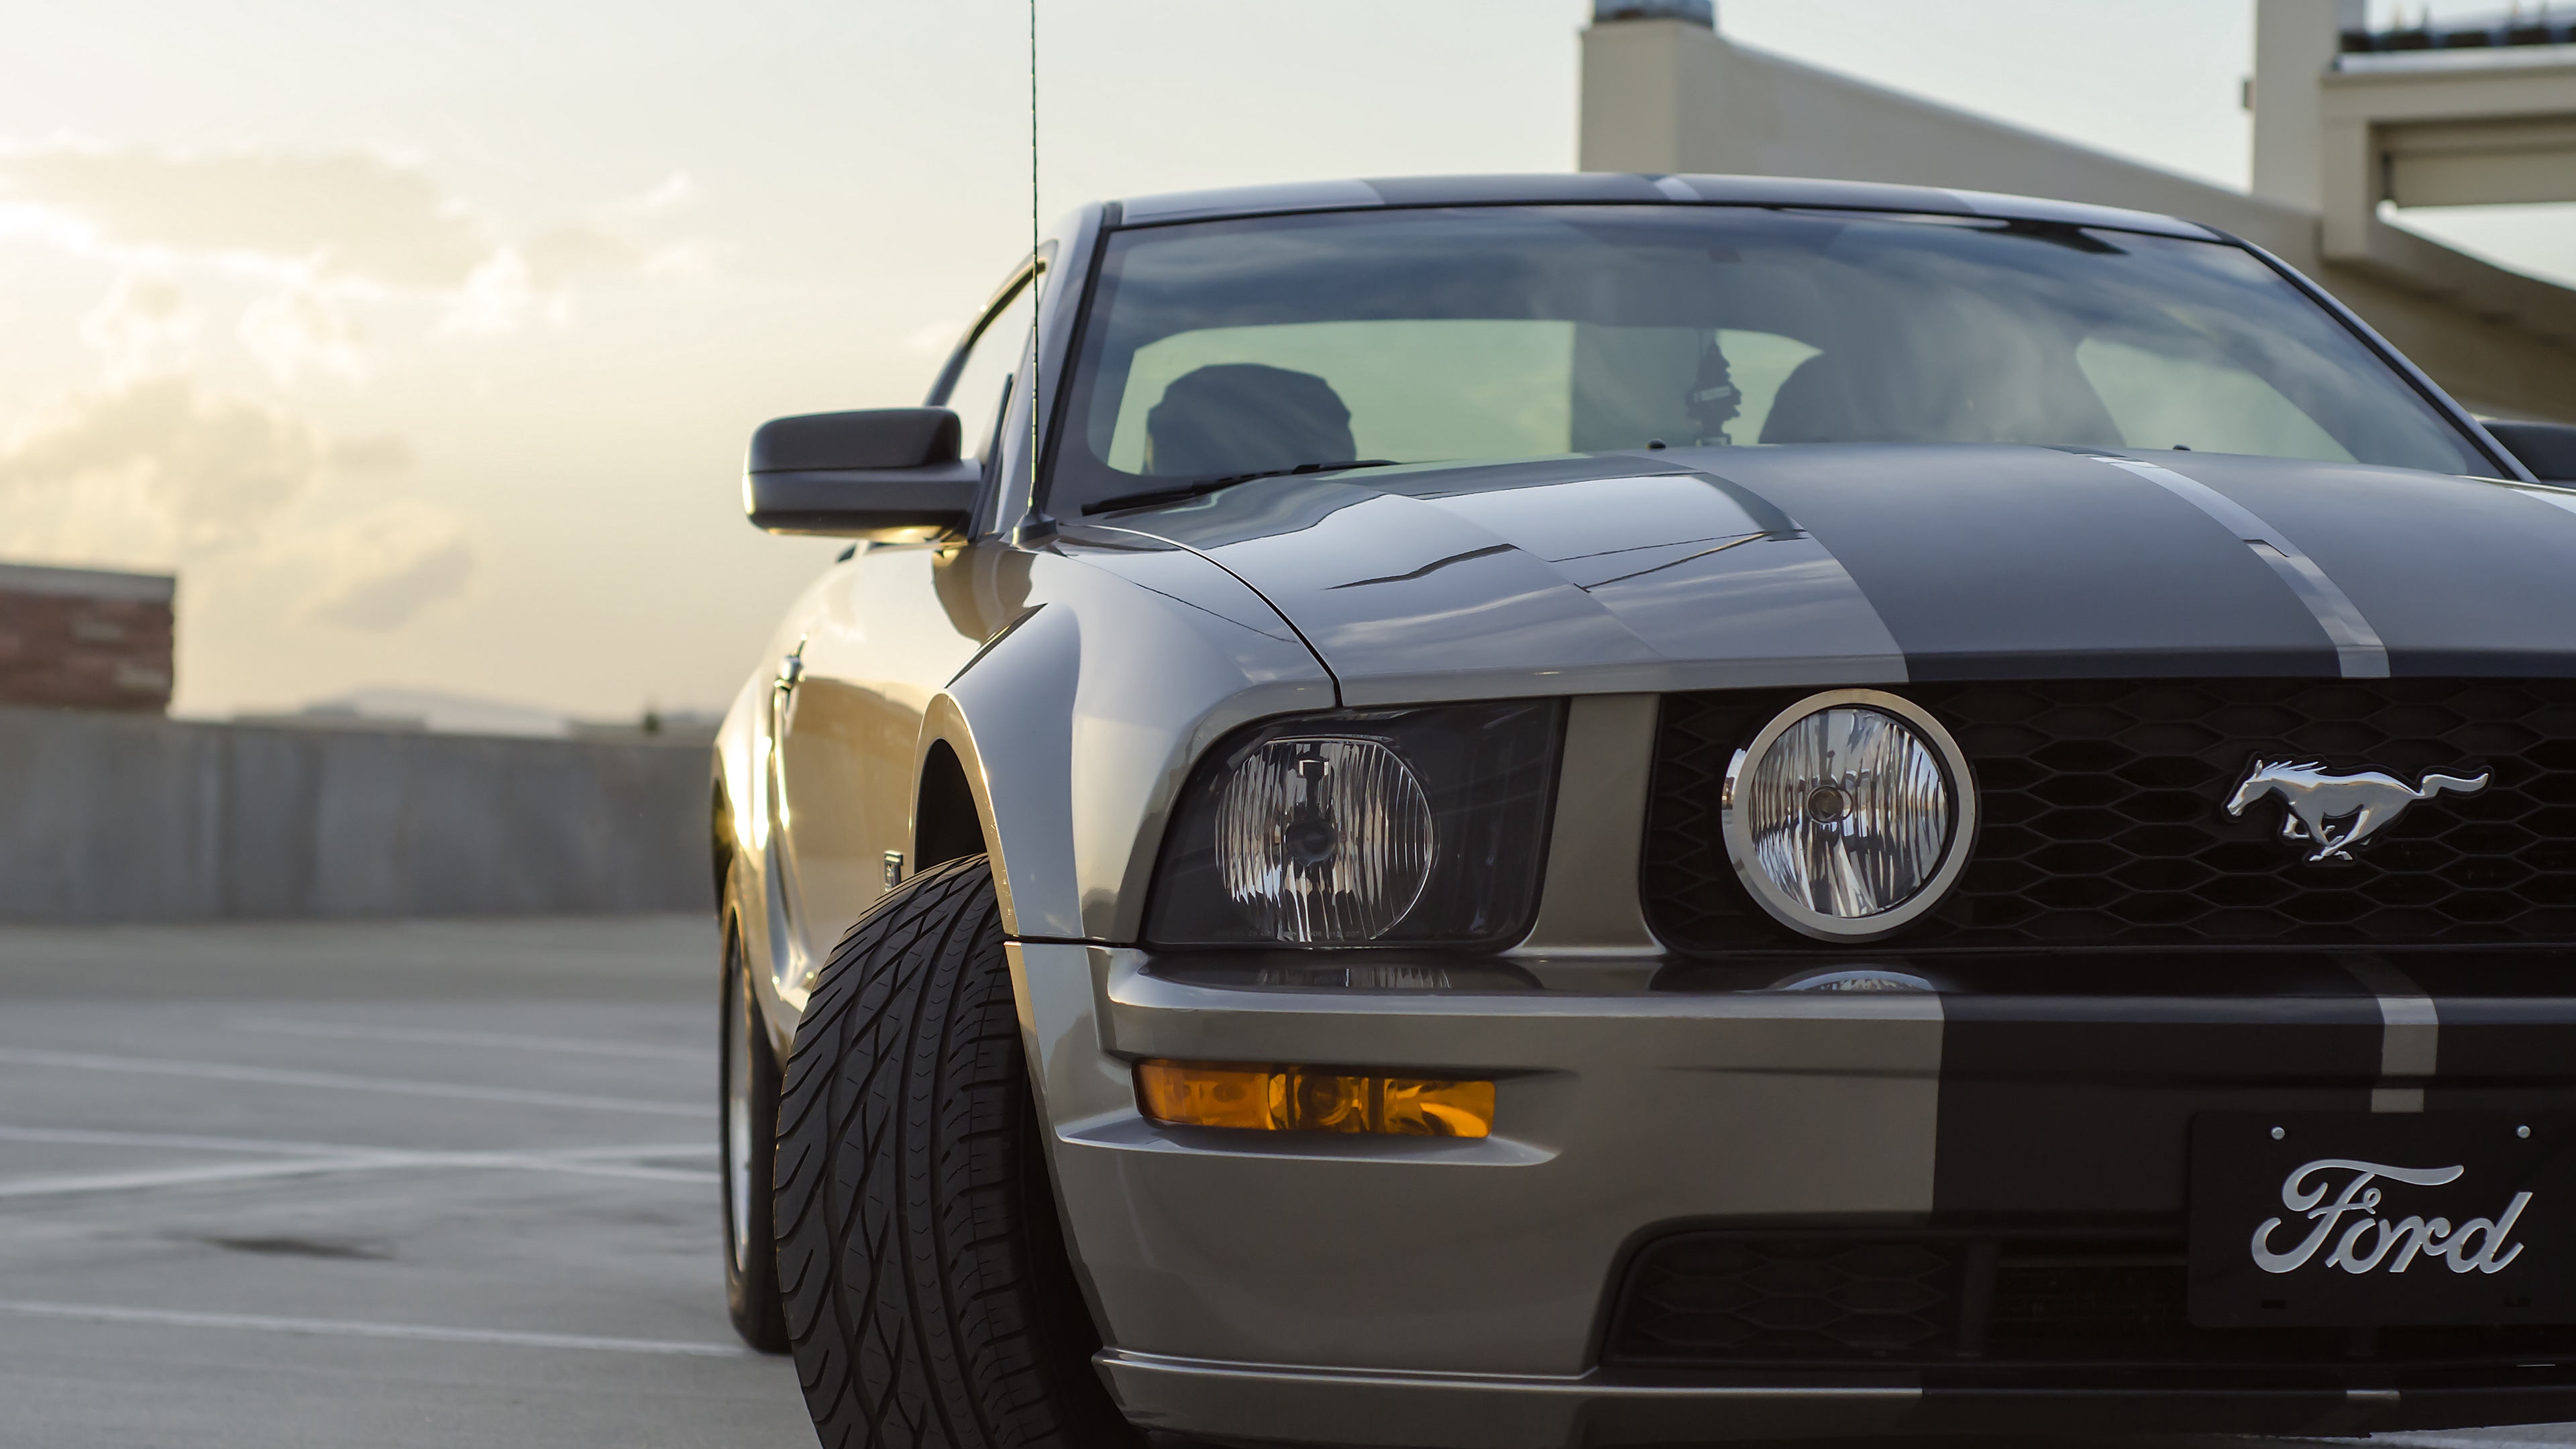 Download wallpapers 3840x2160 ford mustang gt, ford, headlight